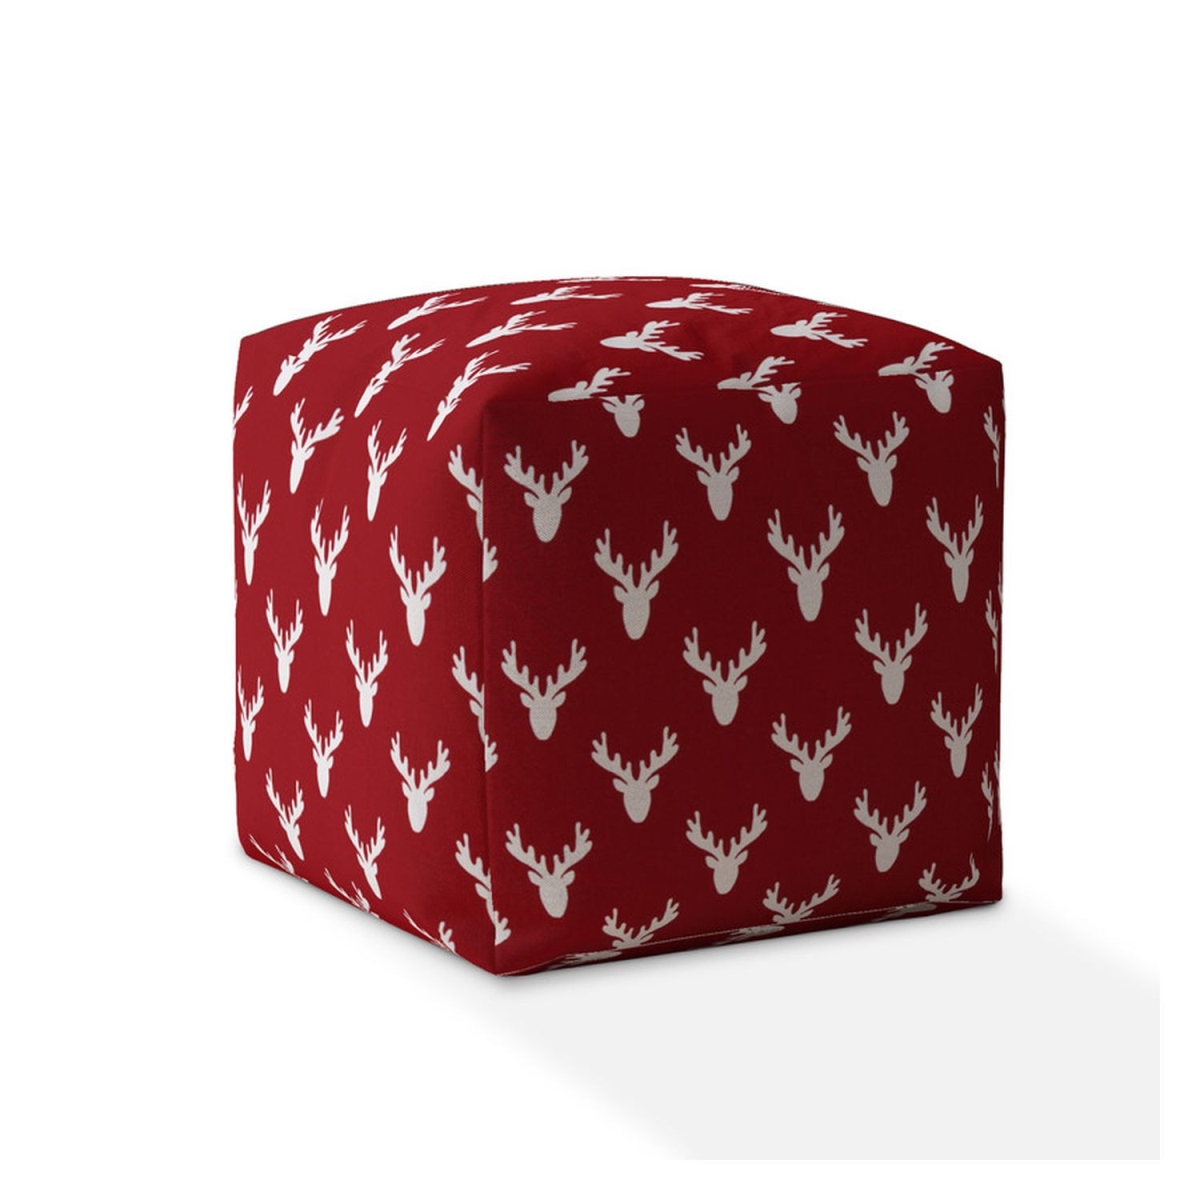 HomeRoots 518483 17 x 17 x 1 in. Red & White Cotton Stag Pouf Cover